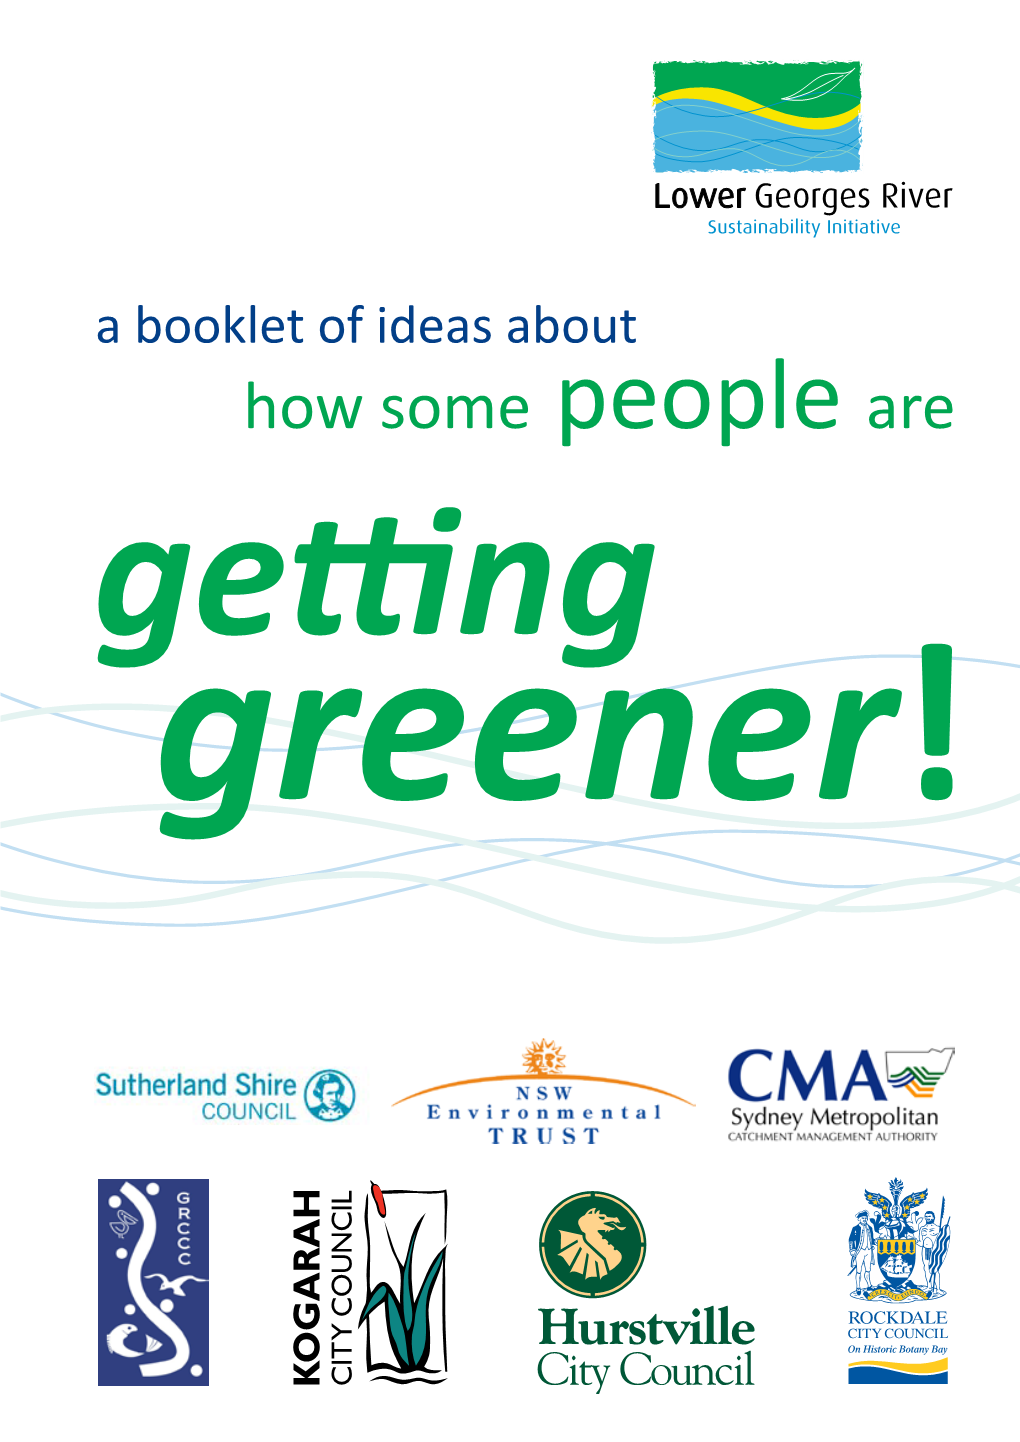 Getting Greener! Program to Make These Ideas Happen